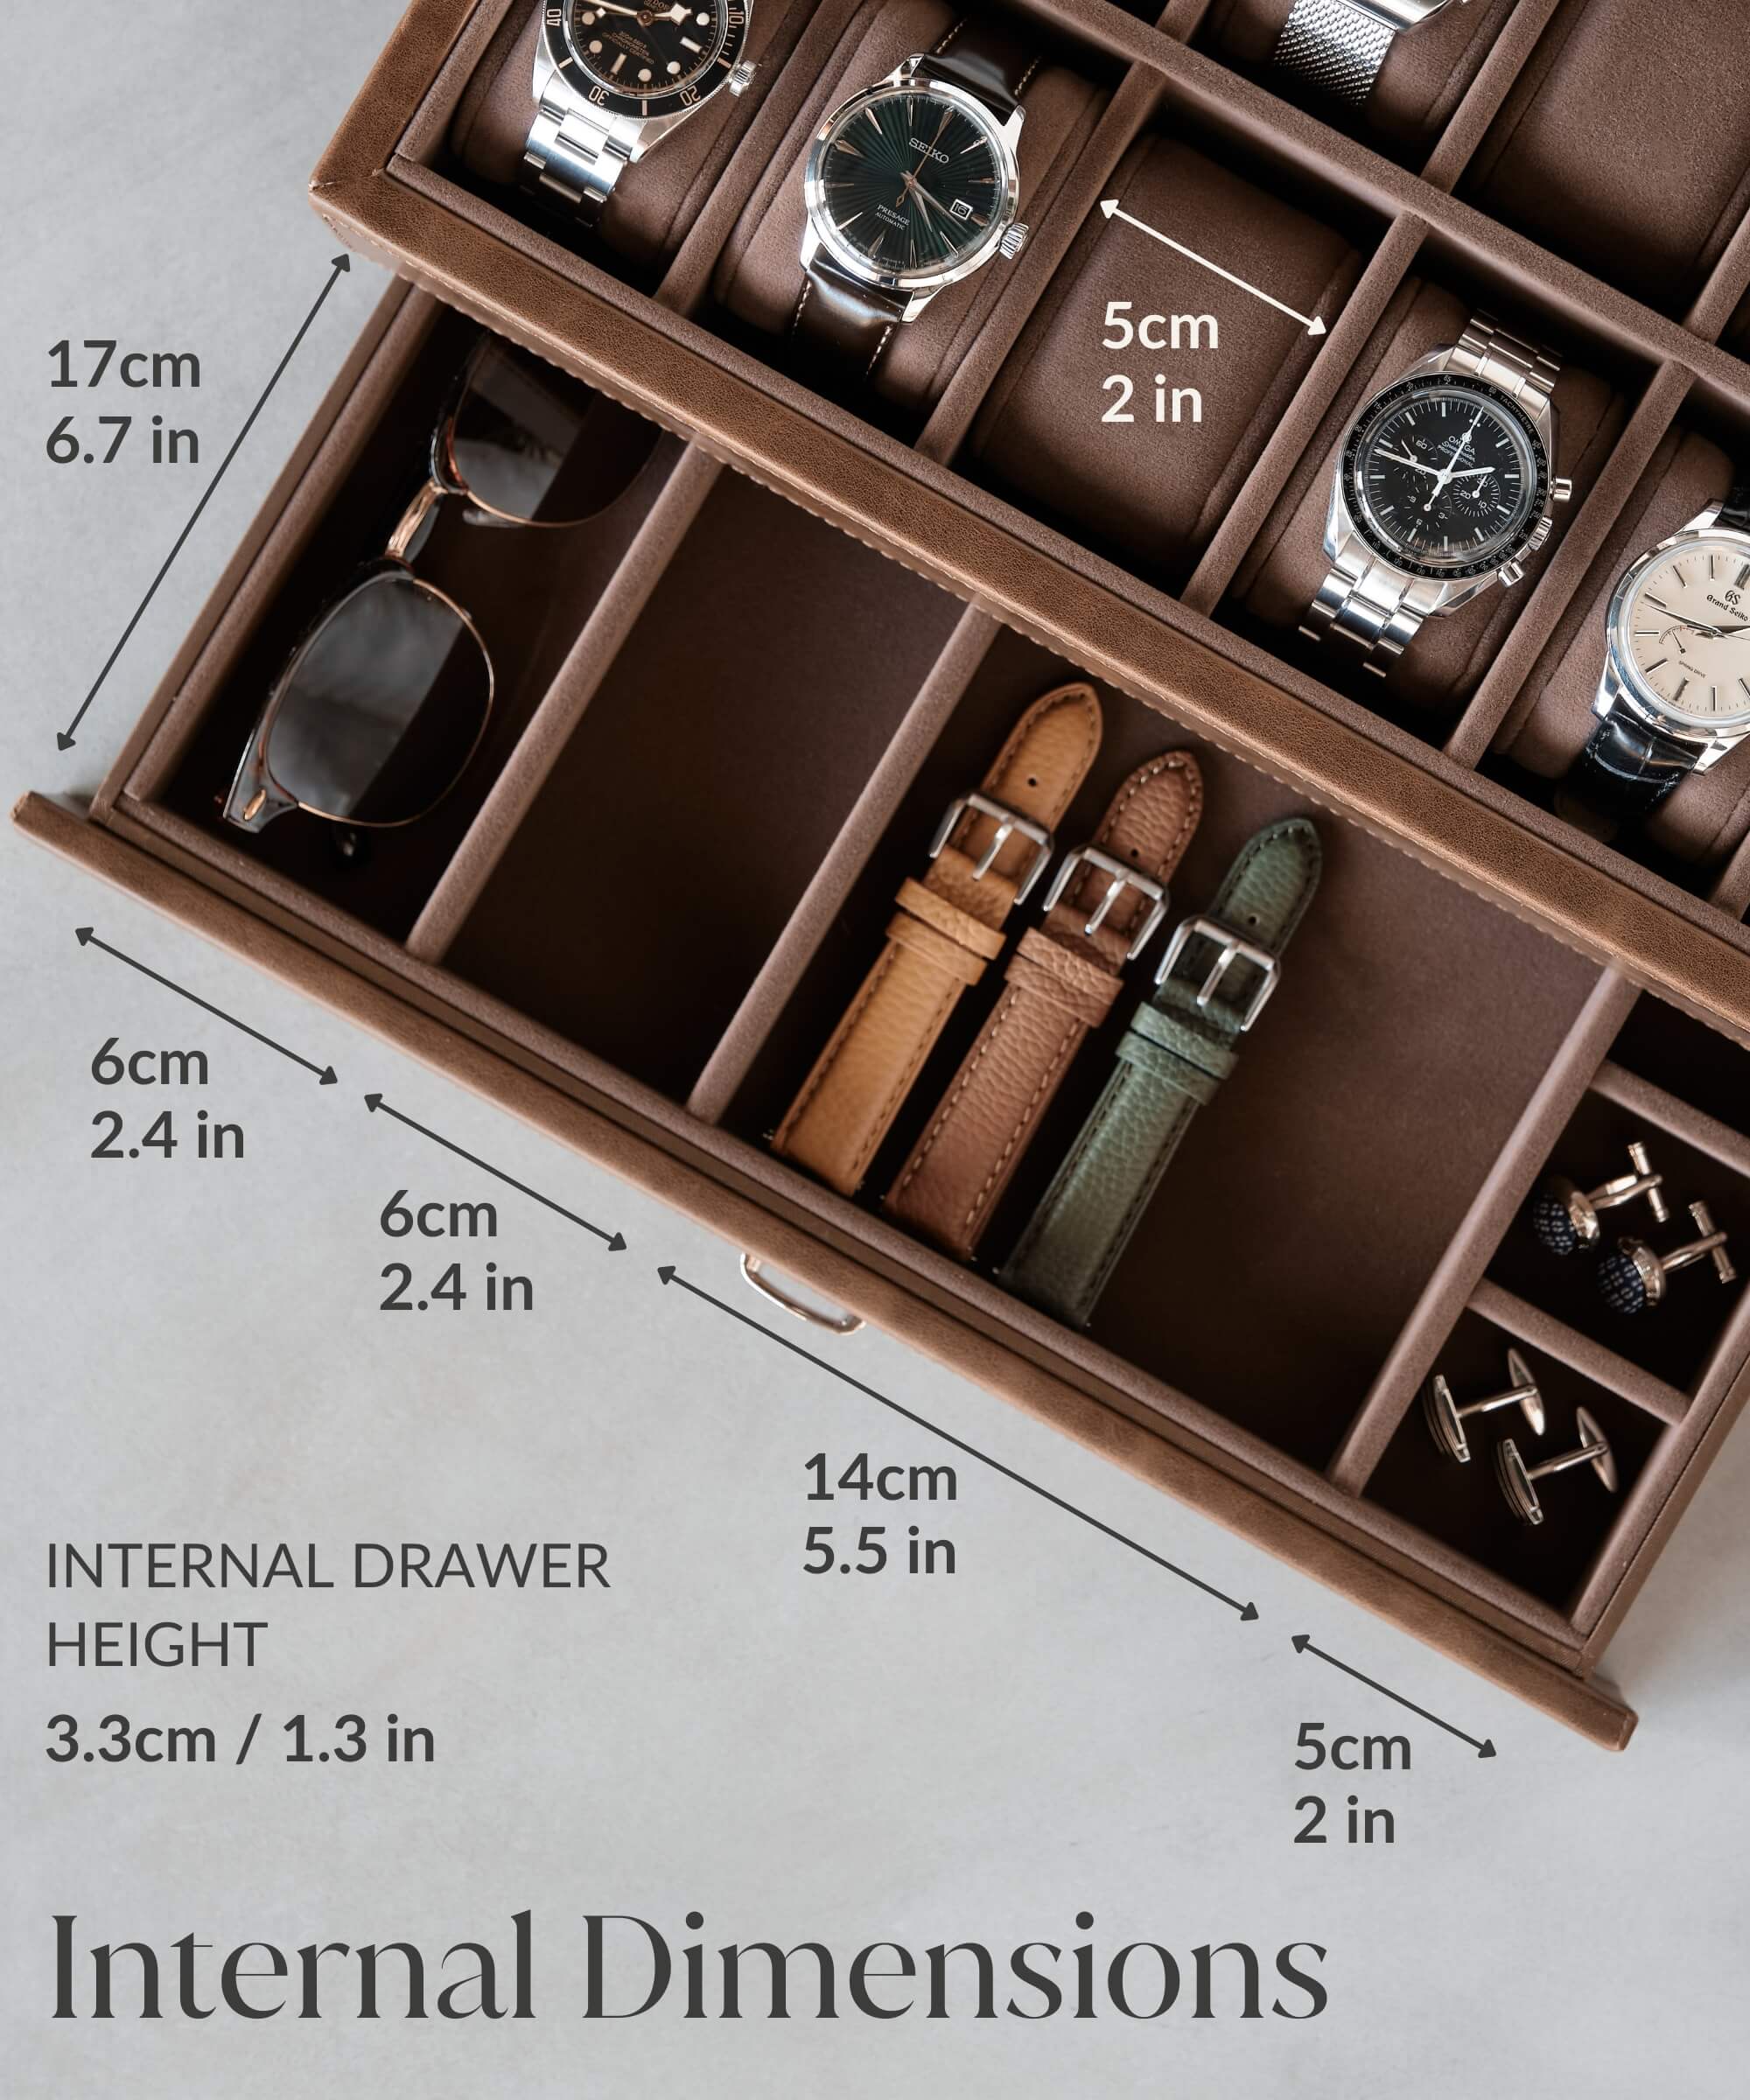 A TAWBURY Bayswater 12 Slot Watch Box with Drawer - Brown for storage and display of timepieces.